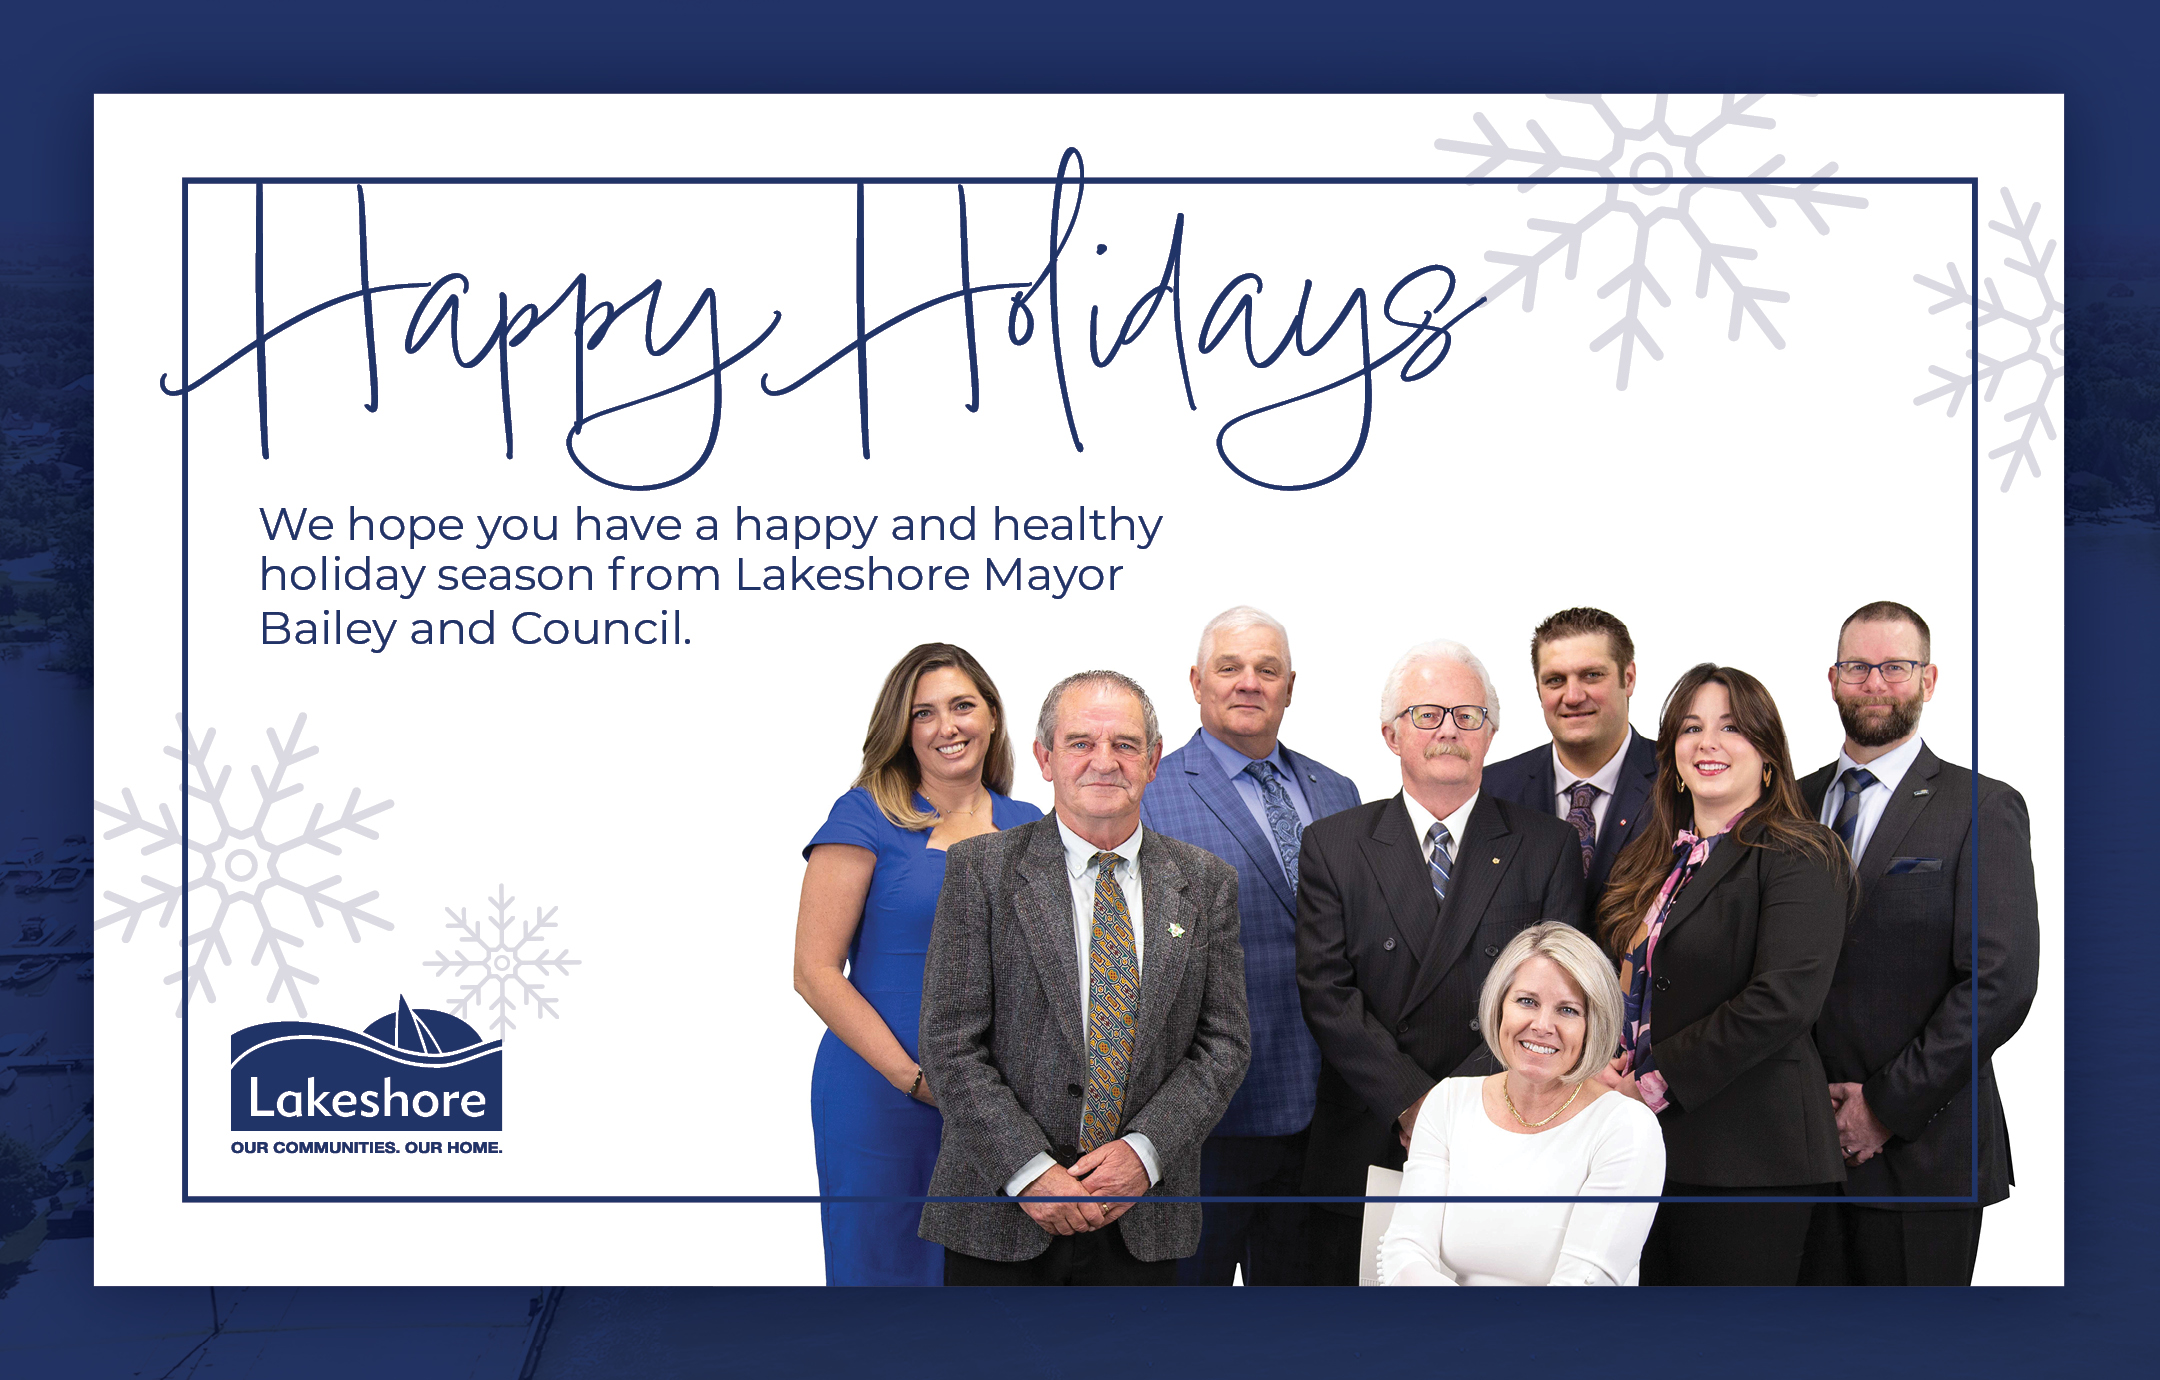 Mayor and Council group photo with text that reads "Happy holidays. We hope you have a happy and healthy holiday season from Lakeshore Mayor Bailey and Council."